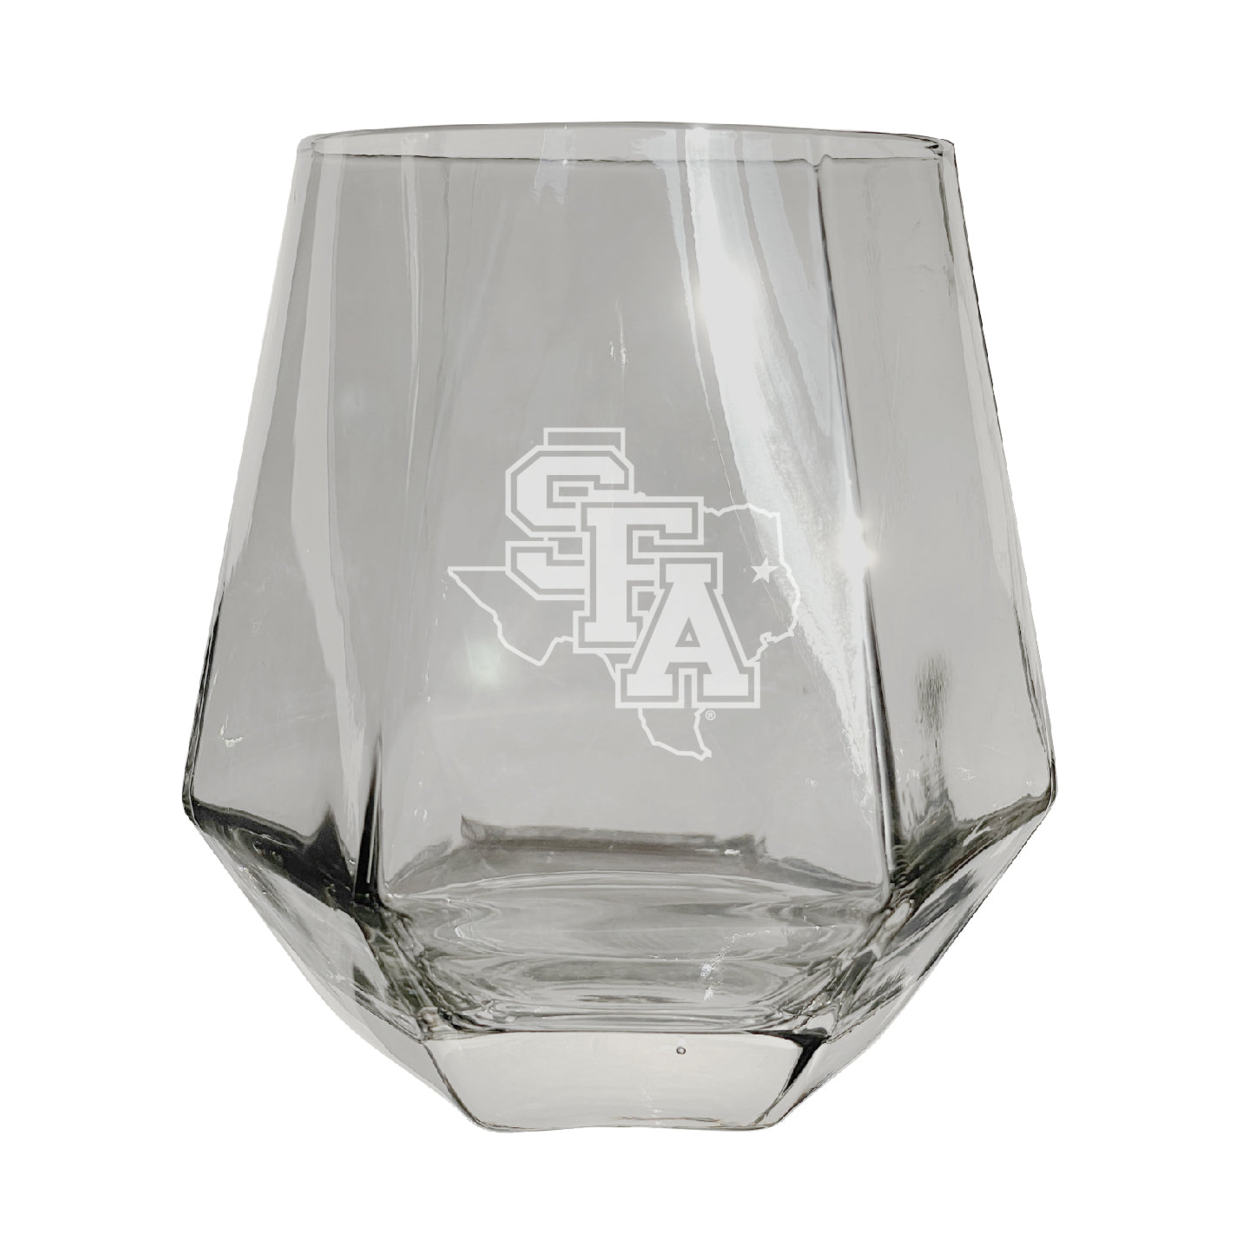 Stephen F. Austin State University Etched Diamond Cut Stemless 10 Ounce Wine Glass Clear